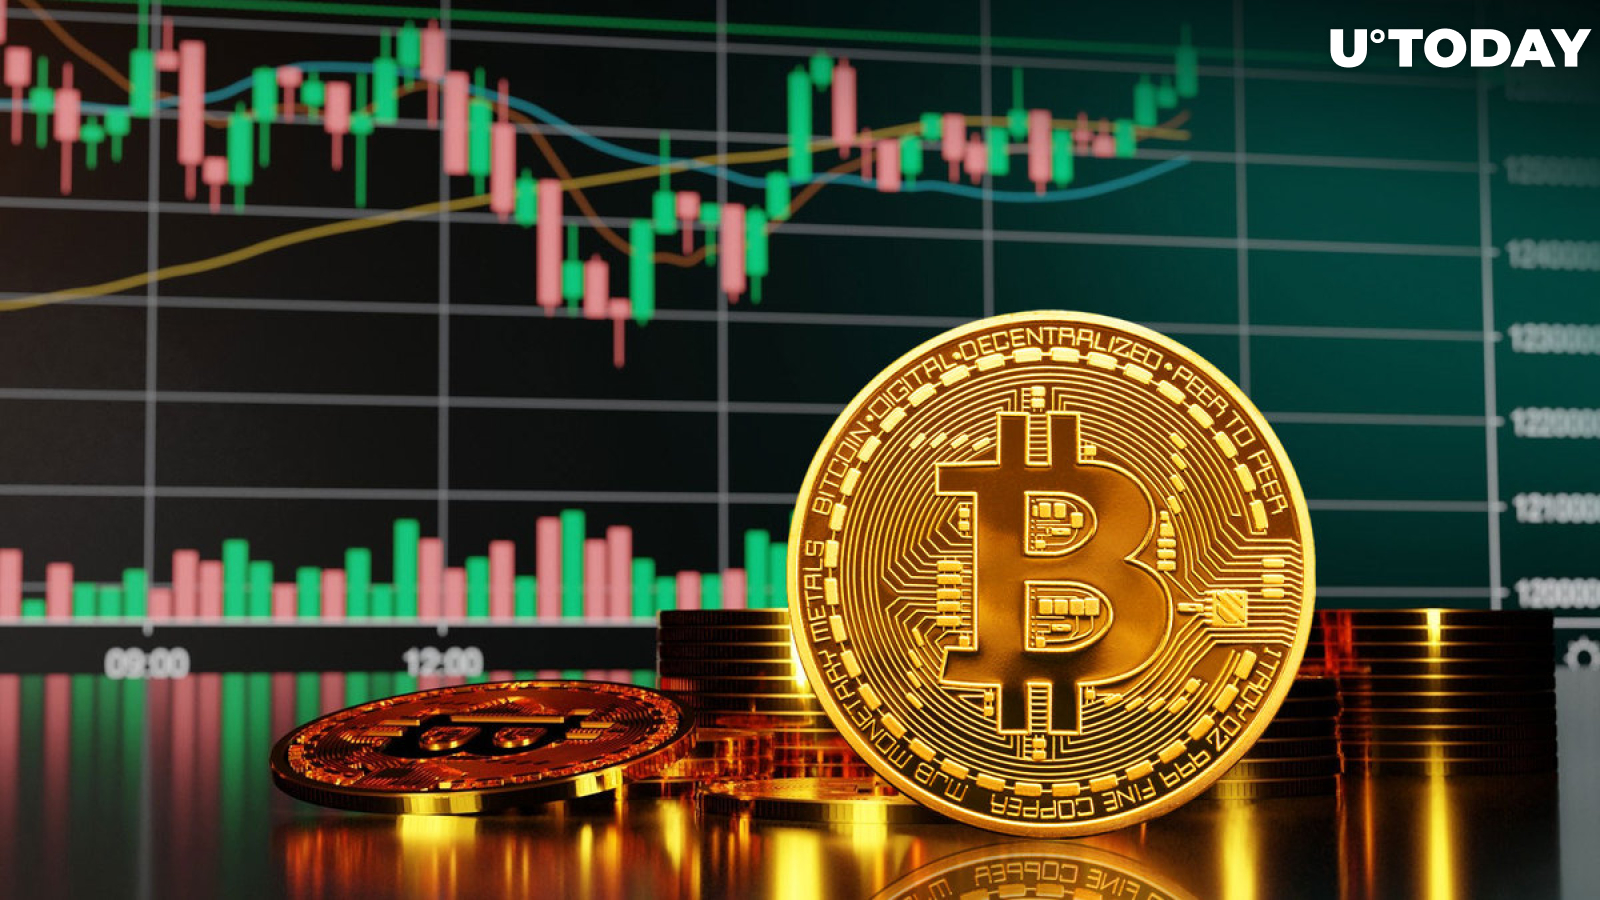 Bitcoin Price to Hit $50,000 by February, Jihan Wu's Matrixport Predicts, If This Happens